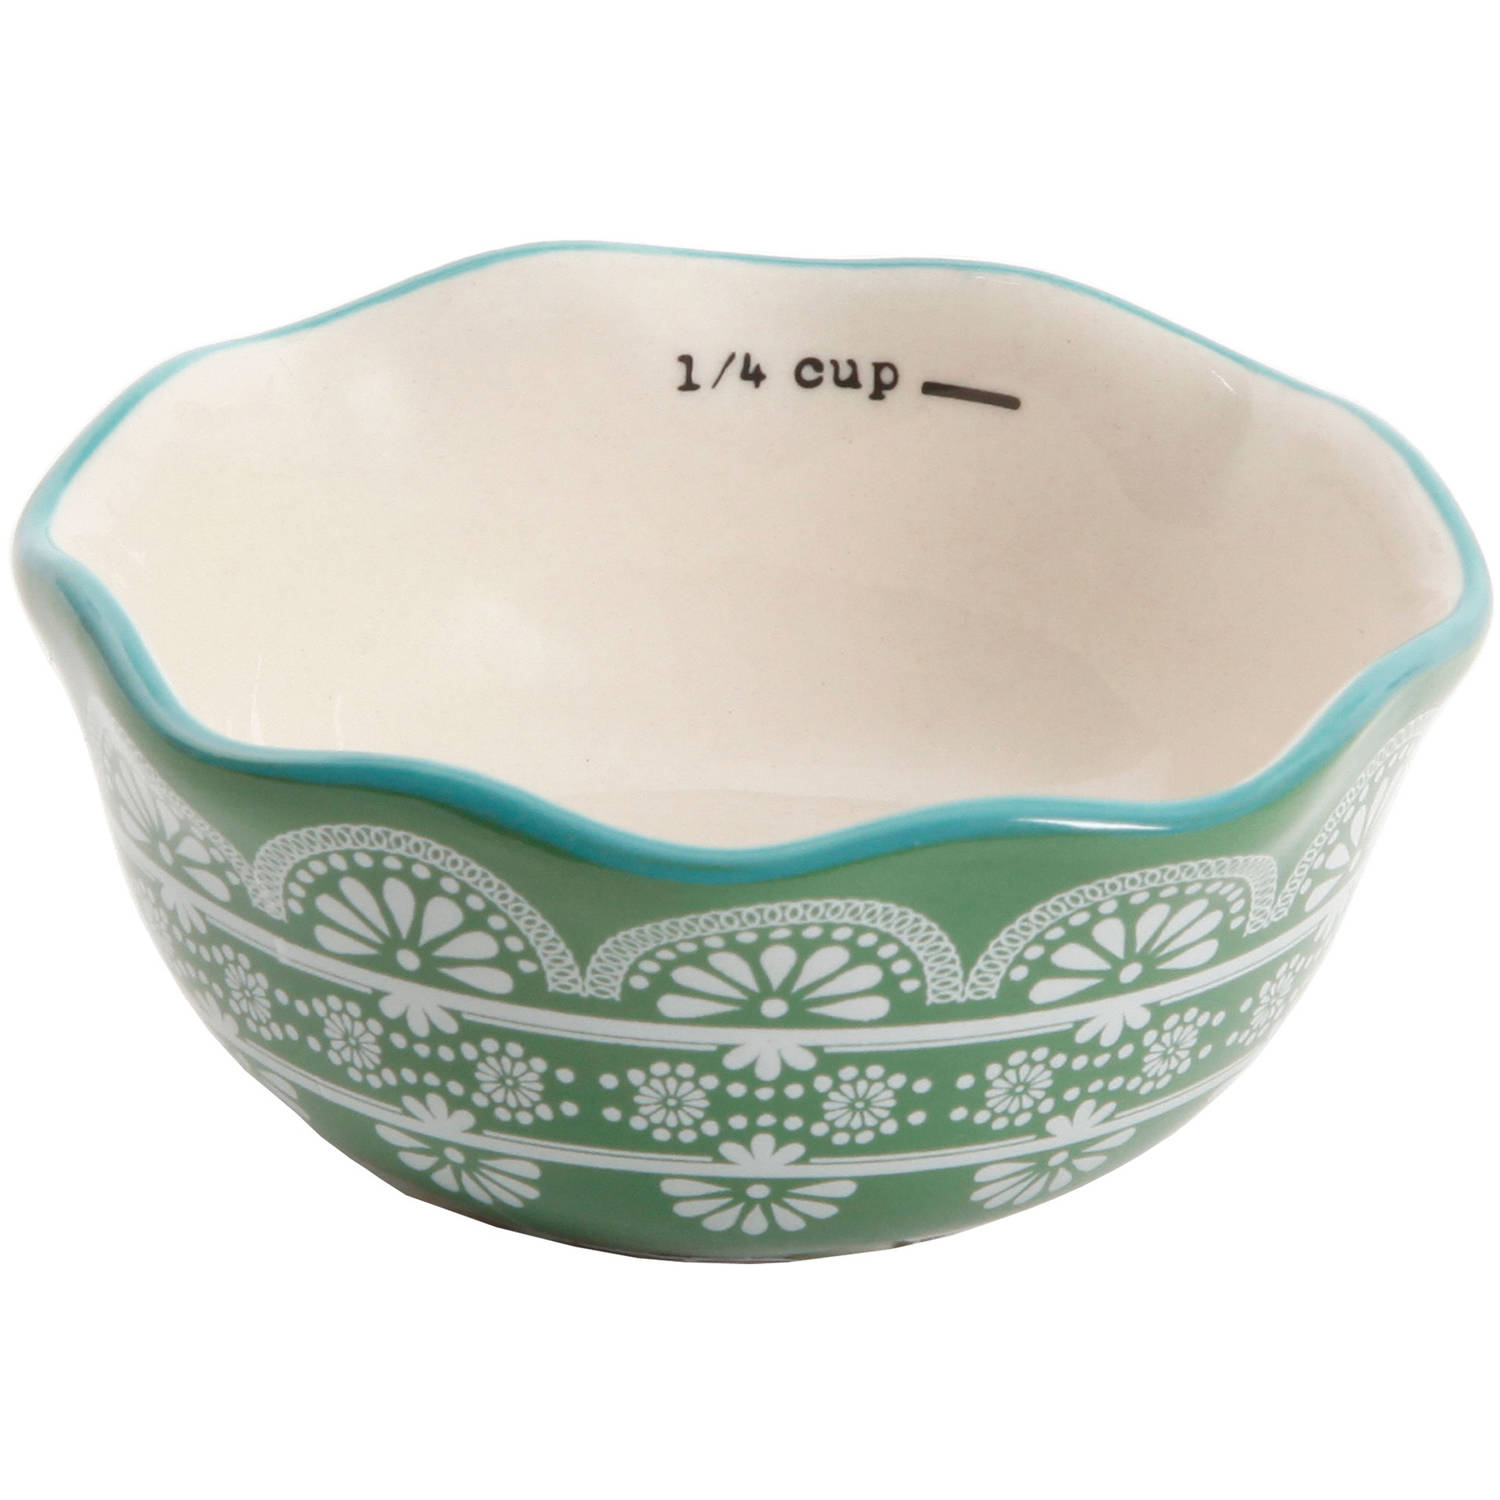 The Pioneer Woman 5-Piece Prep Set, Measuring Bowls & Cup - image 3 of 9